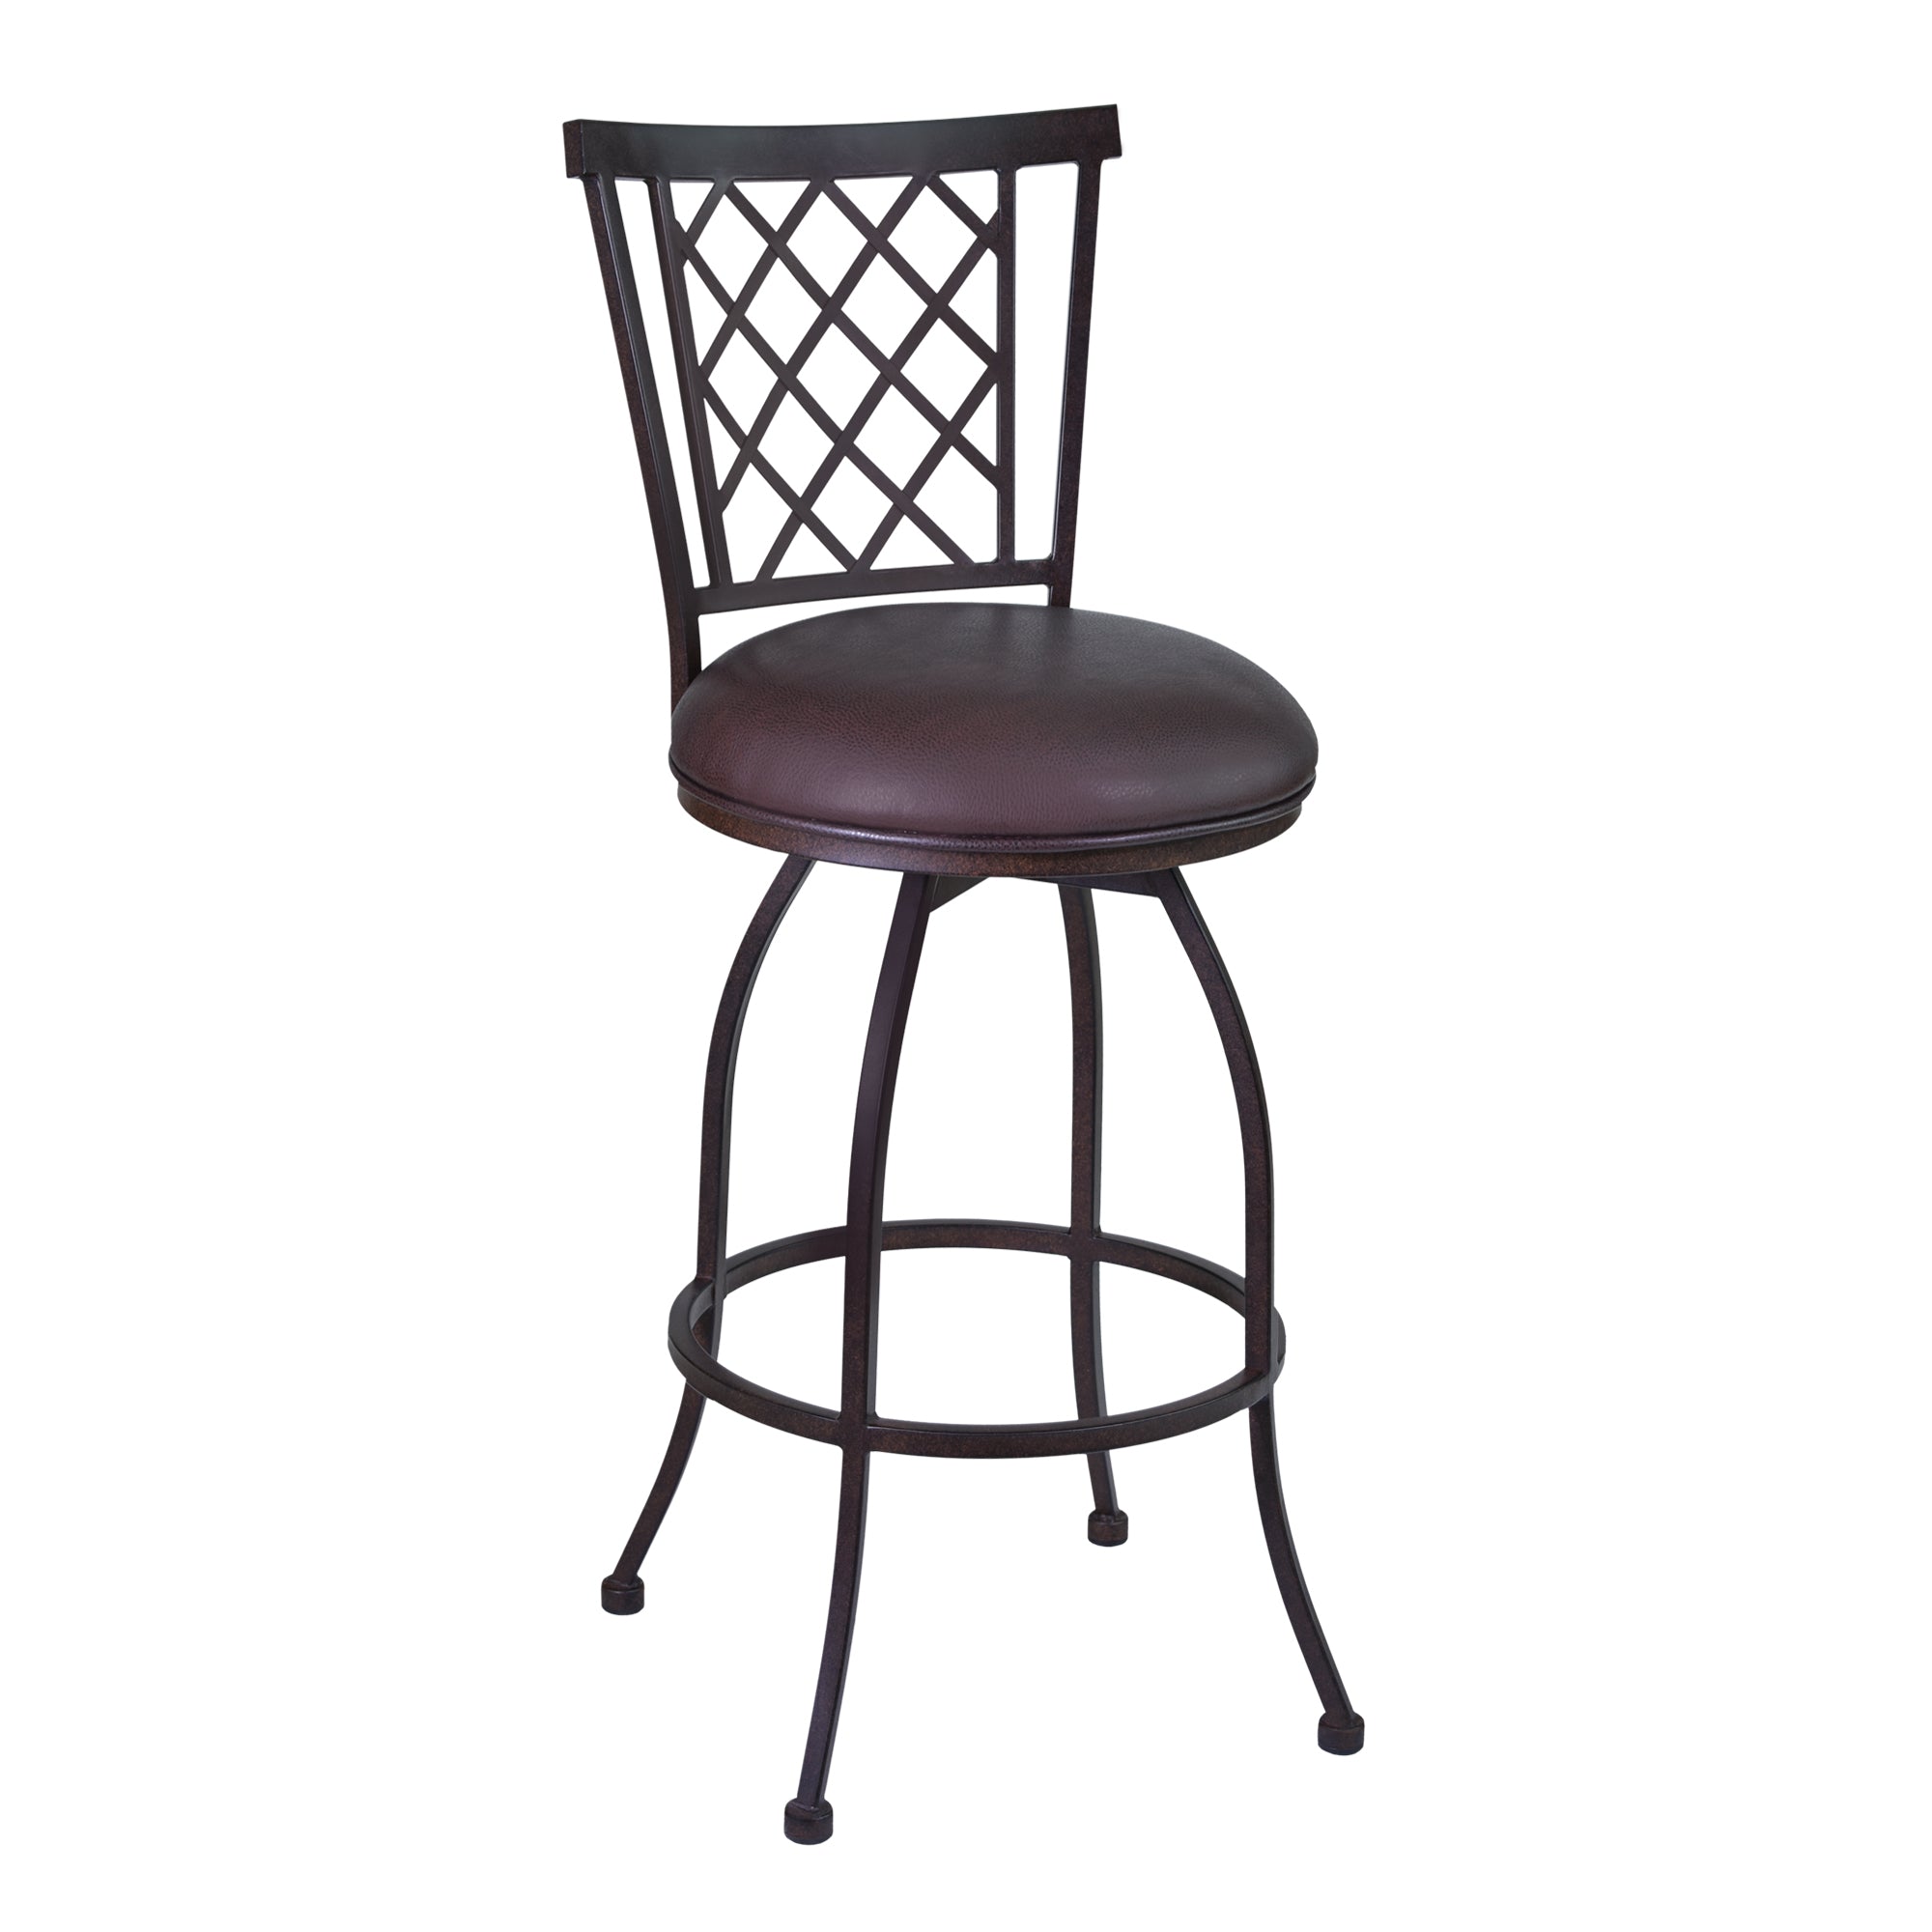 Armen Living LCRE26BABR Reno 26 Counter Height Barstool in Auburn Bay finish with Brown Faux Leather